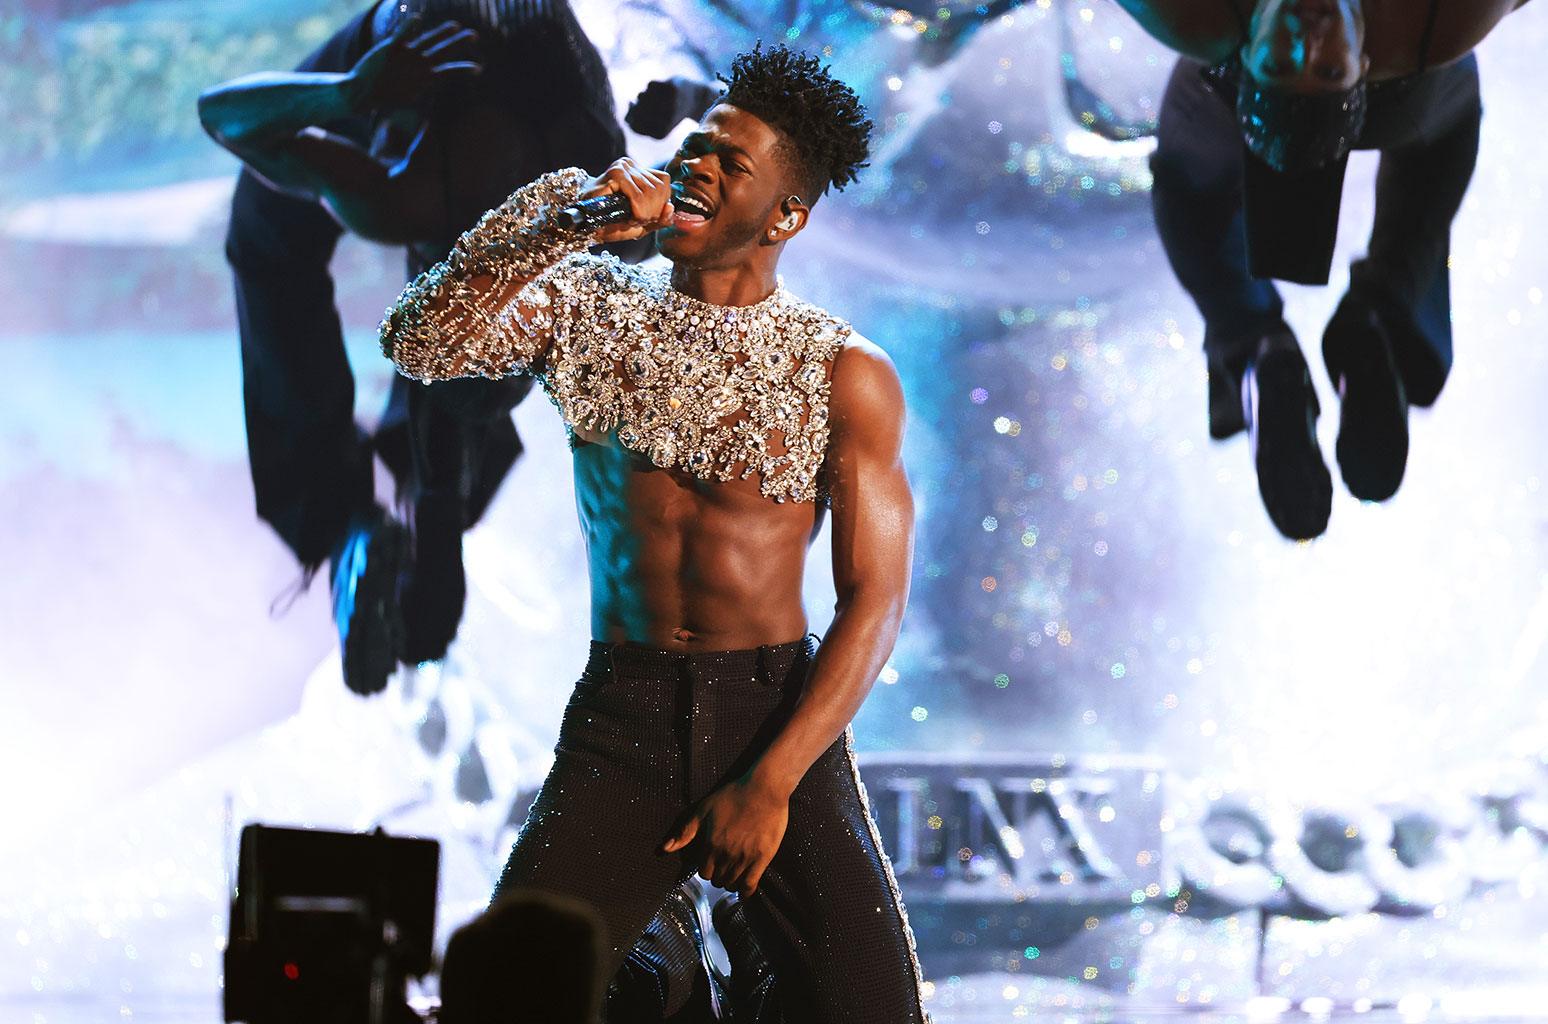 Lil Nas X wore Balmain While performing “Industry Baby” and “Montero”  @ 2022 Grammy Awards